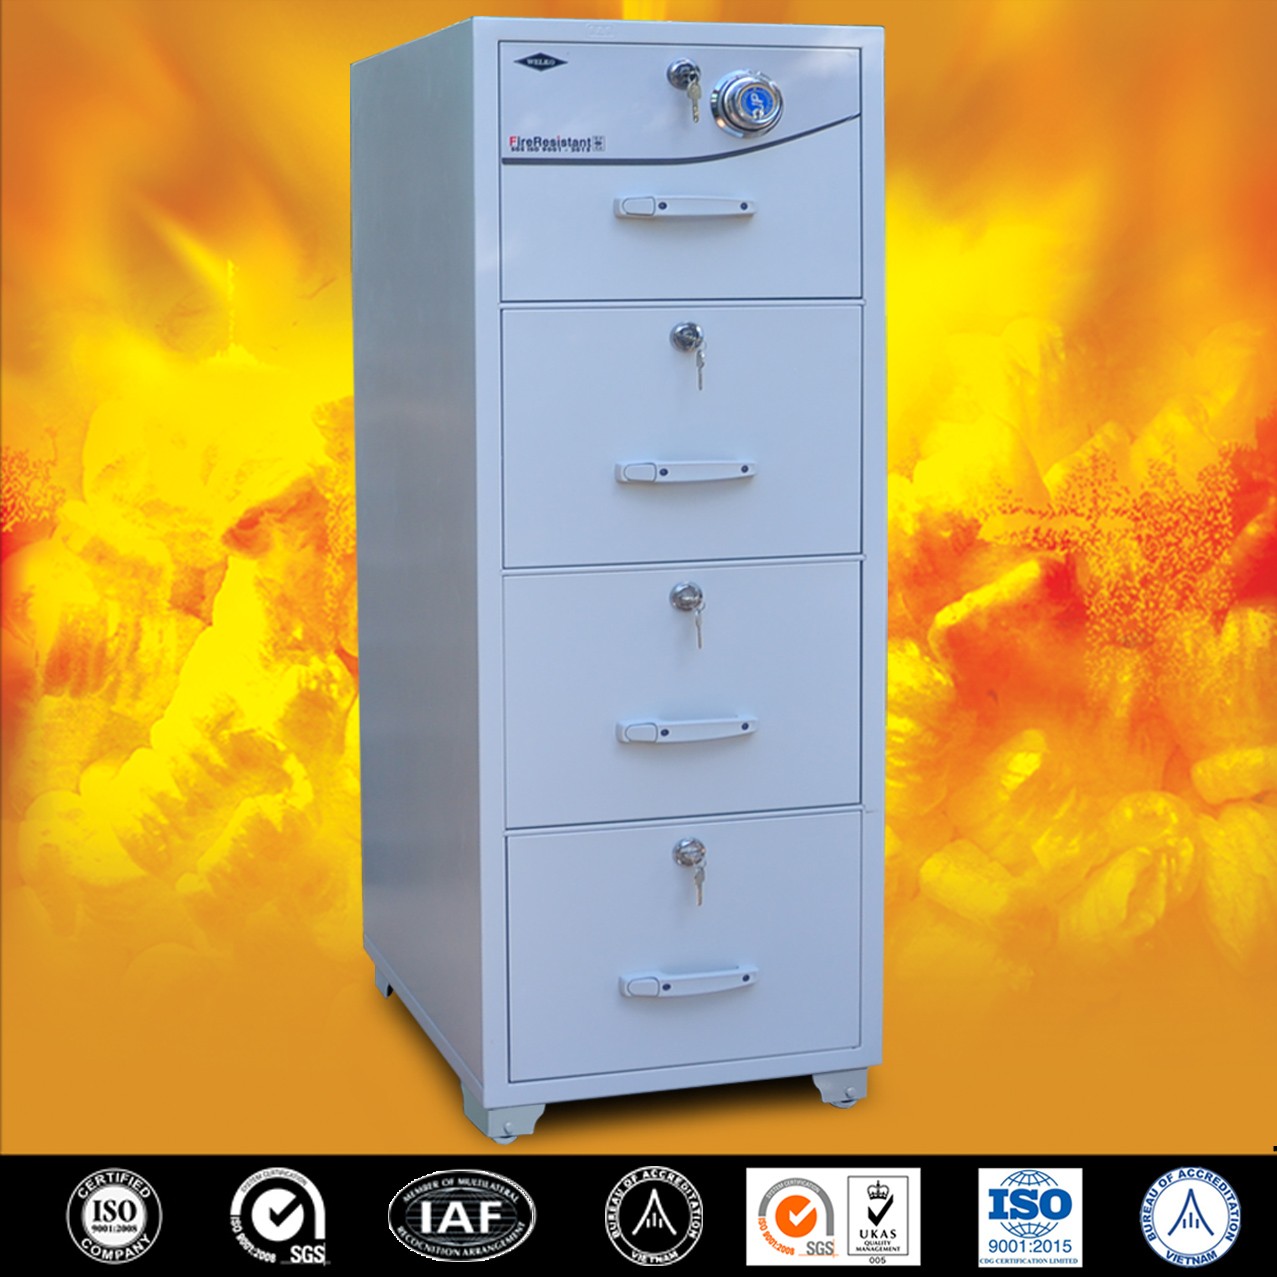 Modern Fire resistant secure storage cabinets